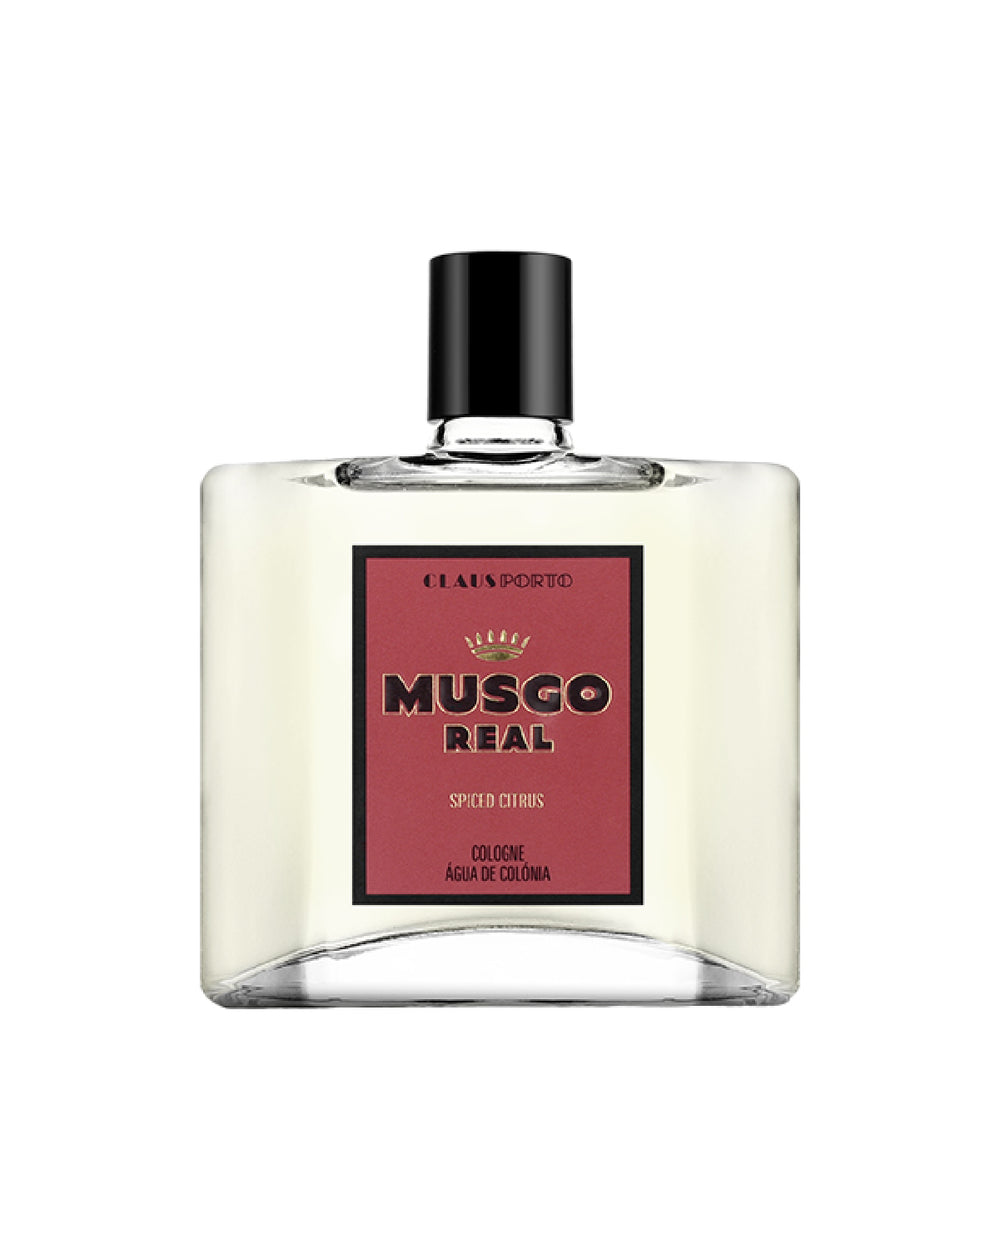 Musgo Real Cologne Spiced Citrus